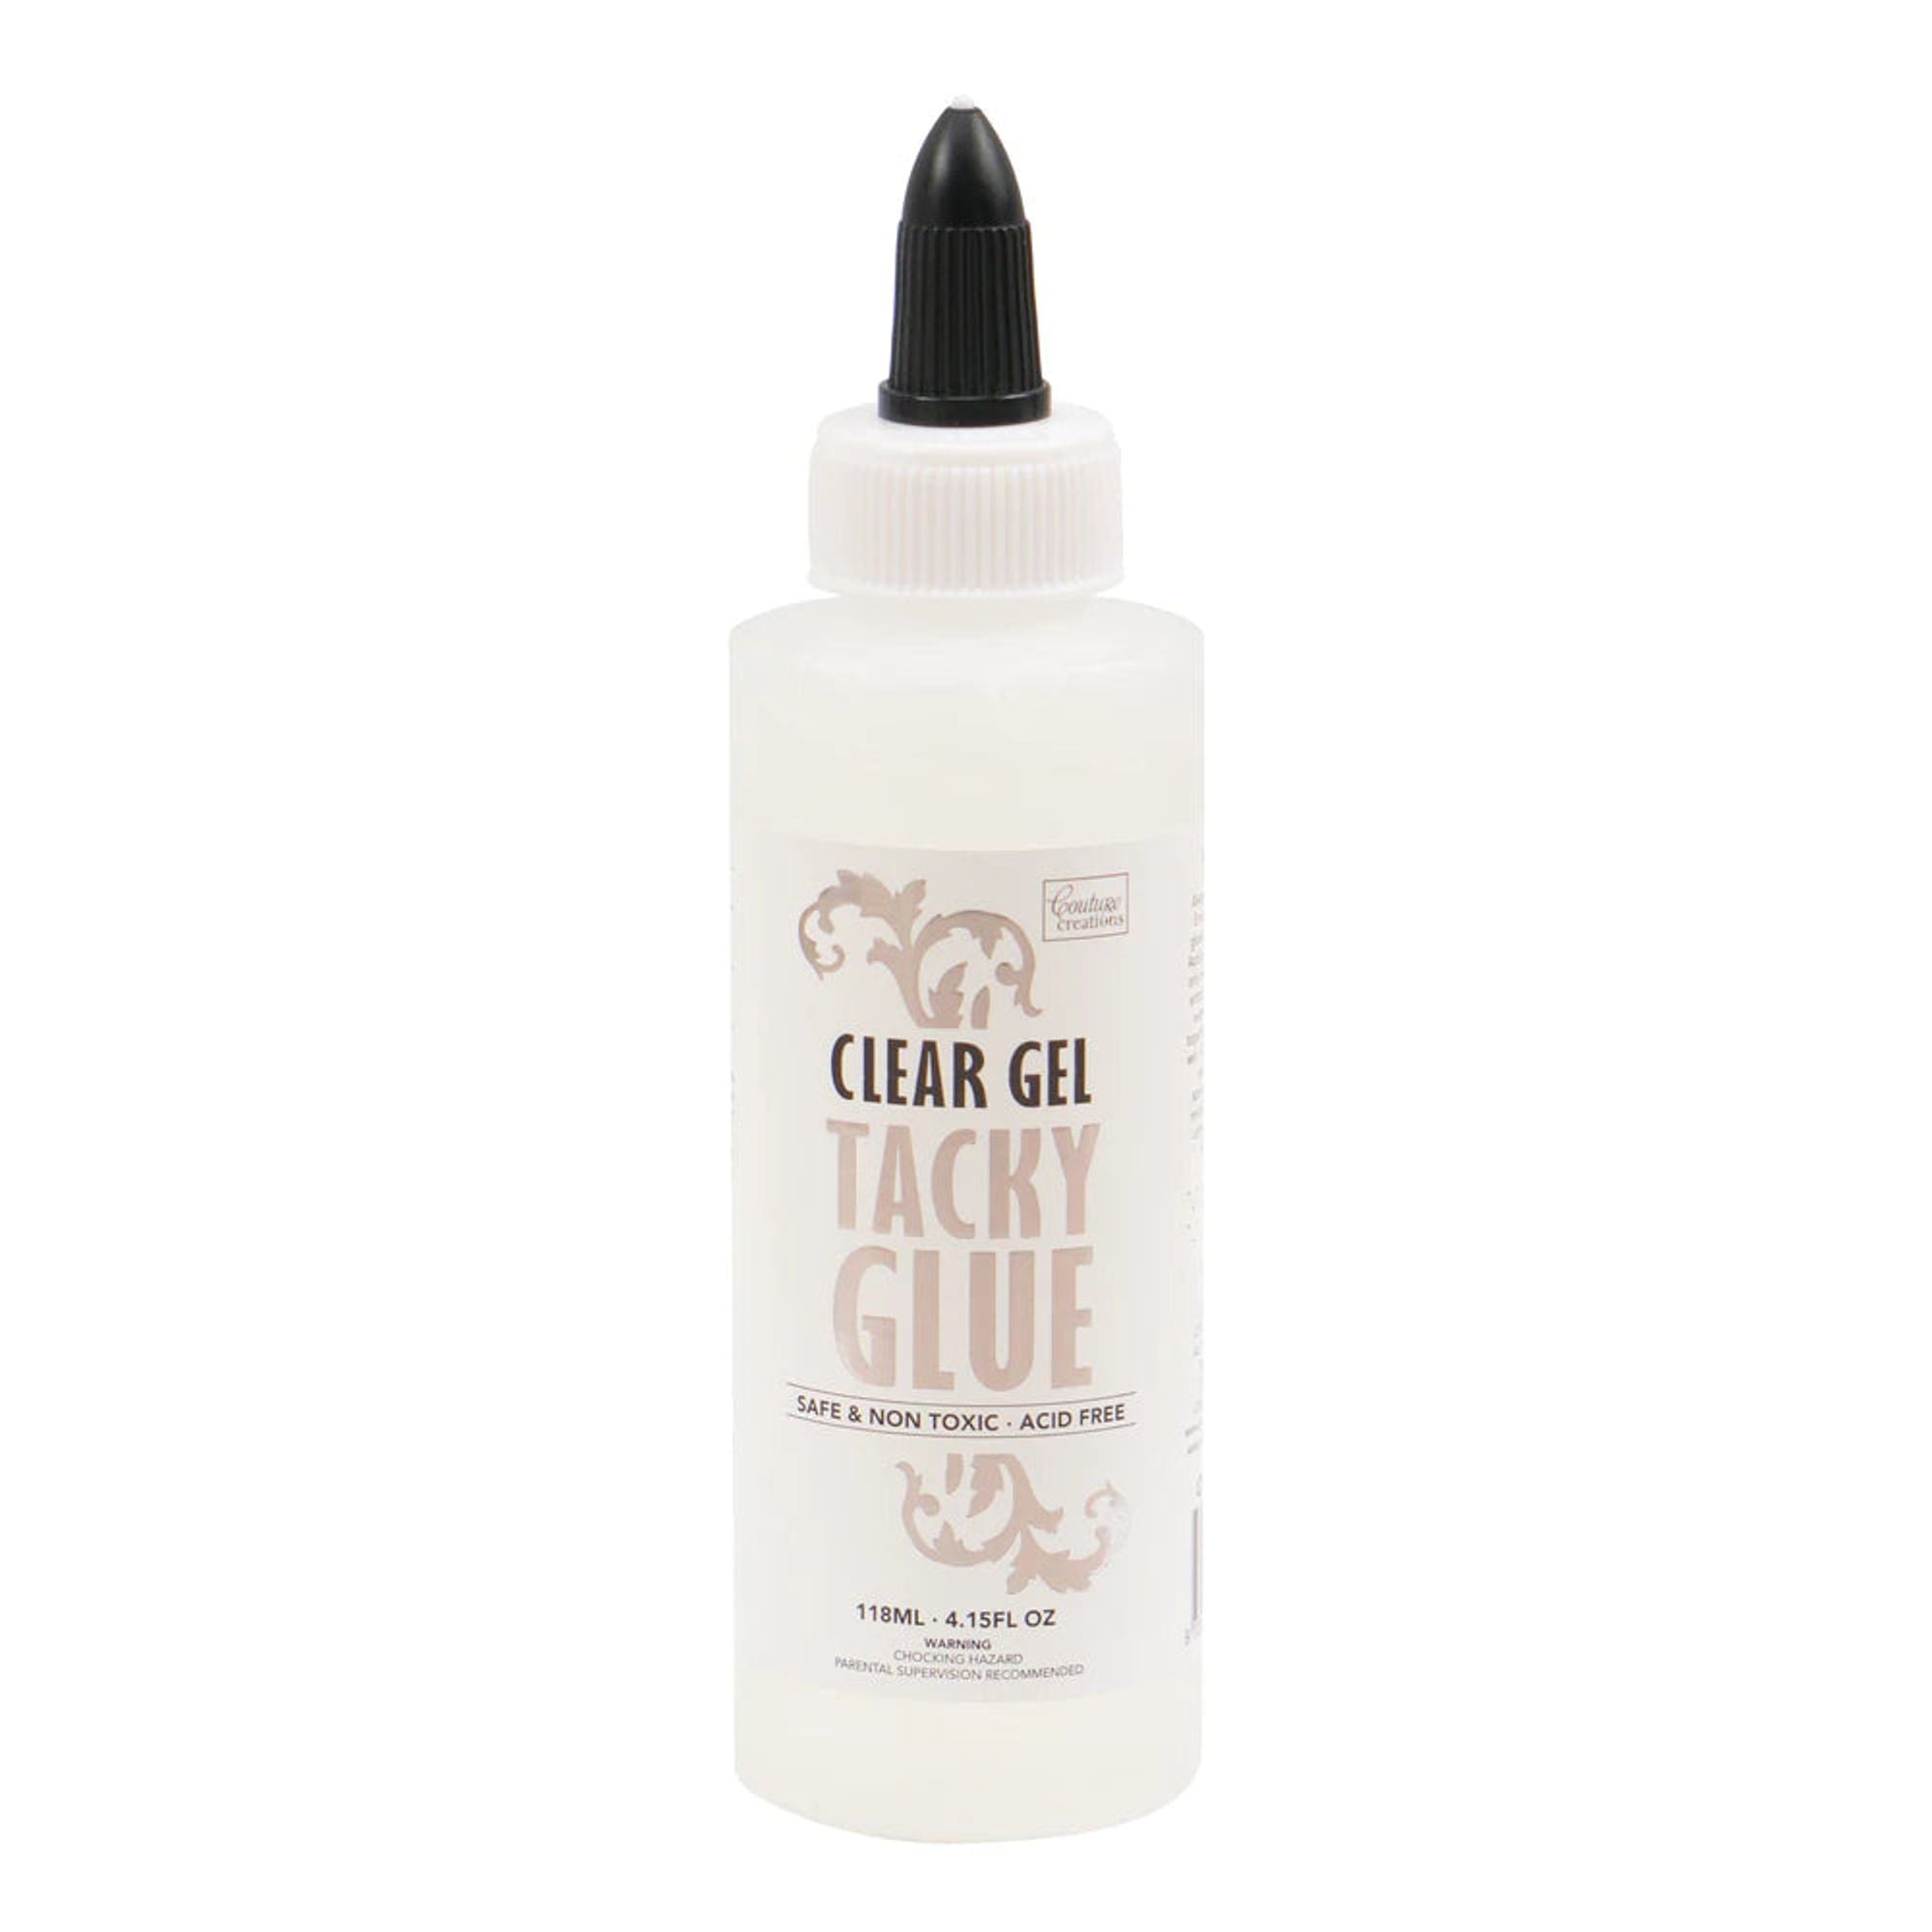 Couture Creations - Adhesive - ClearGel Tacky Glue (118mL | 4.15 fl oz)